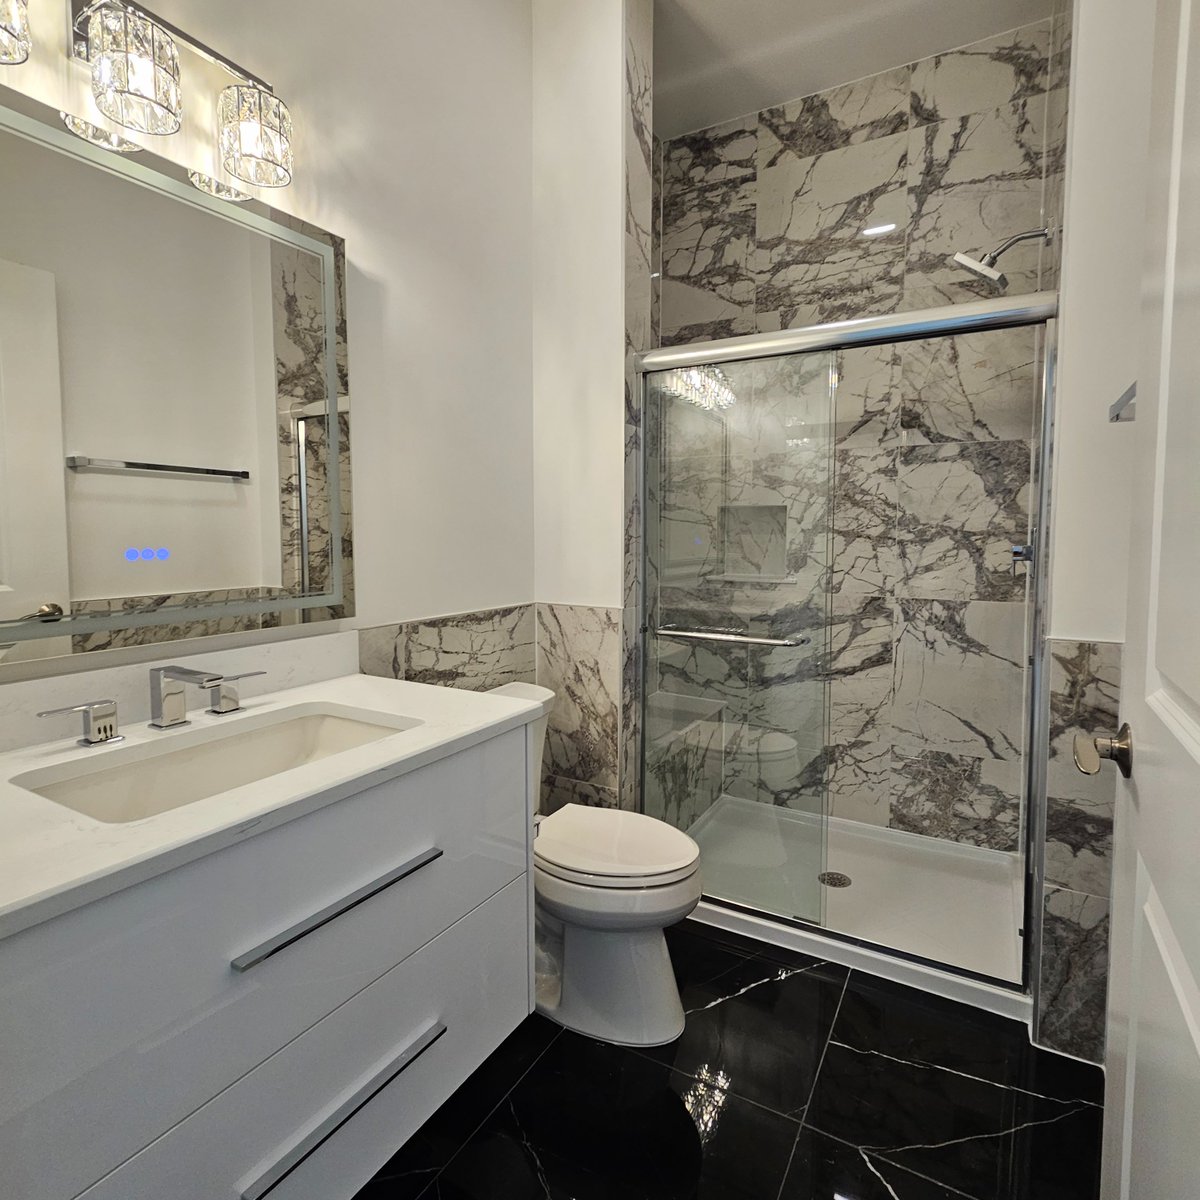 Love the black, white and gray in this 1st floor #bathroomdesign! 😊 Notice the oversized #sink & #smartmirror. Our #modelhome is open from 11 am - 5 pm at 4012 Alfalfa Ln #Naperville #newhome #newhomedesign #newhomebuilder #newhomeconstruction #newconstruction #homebuilder